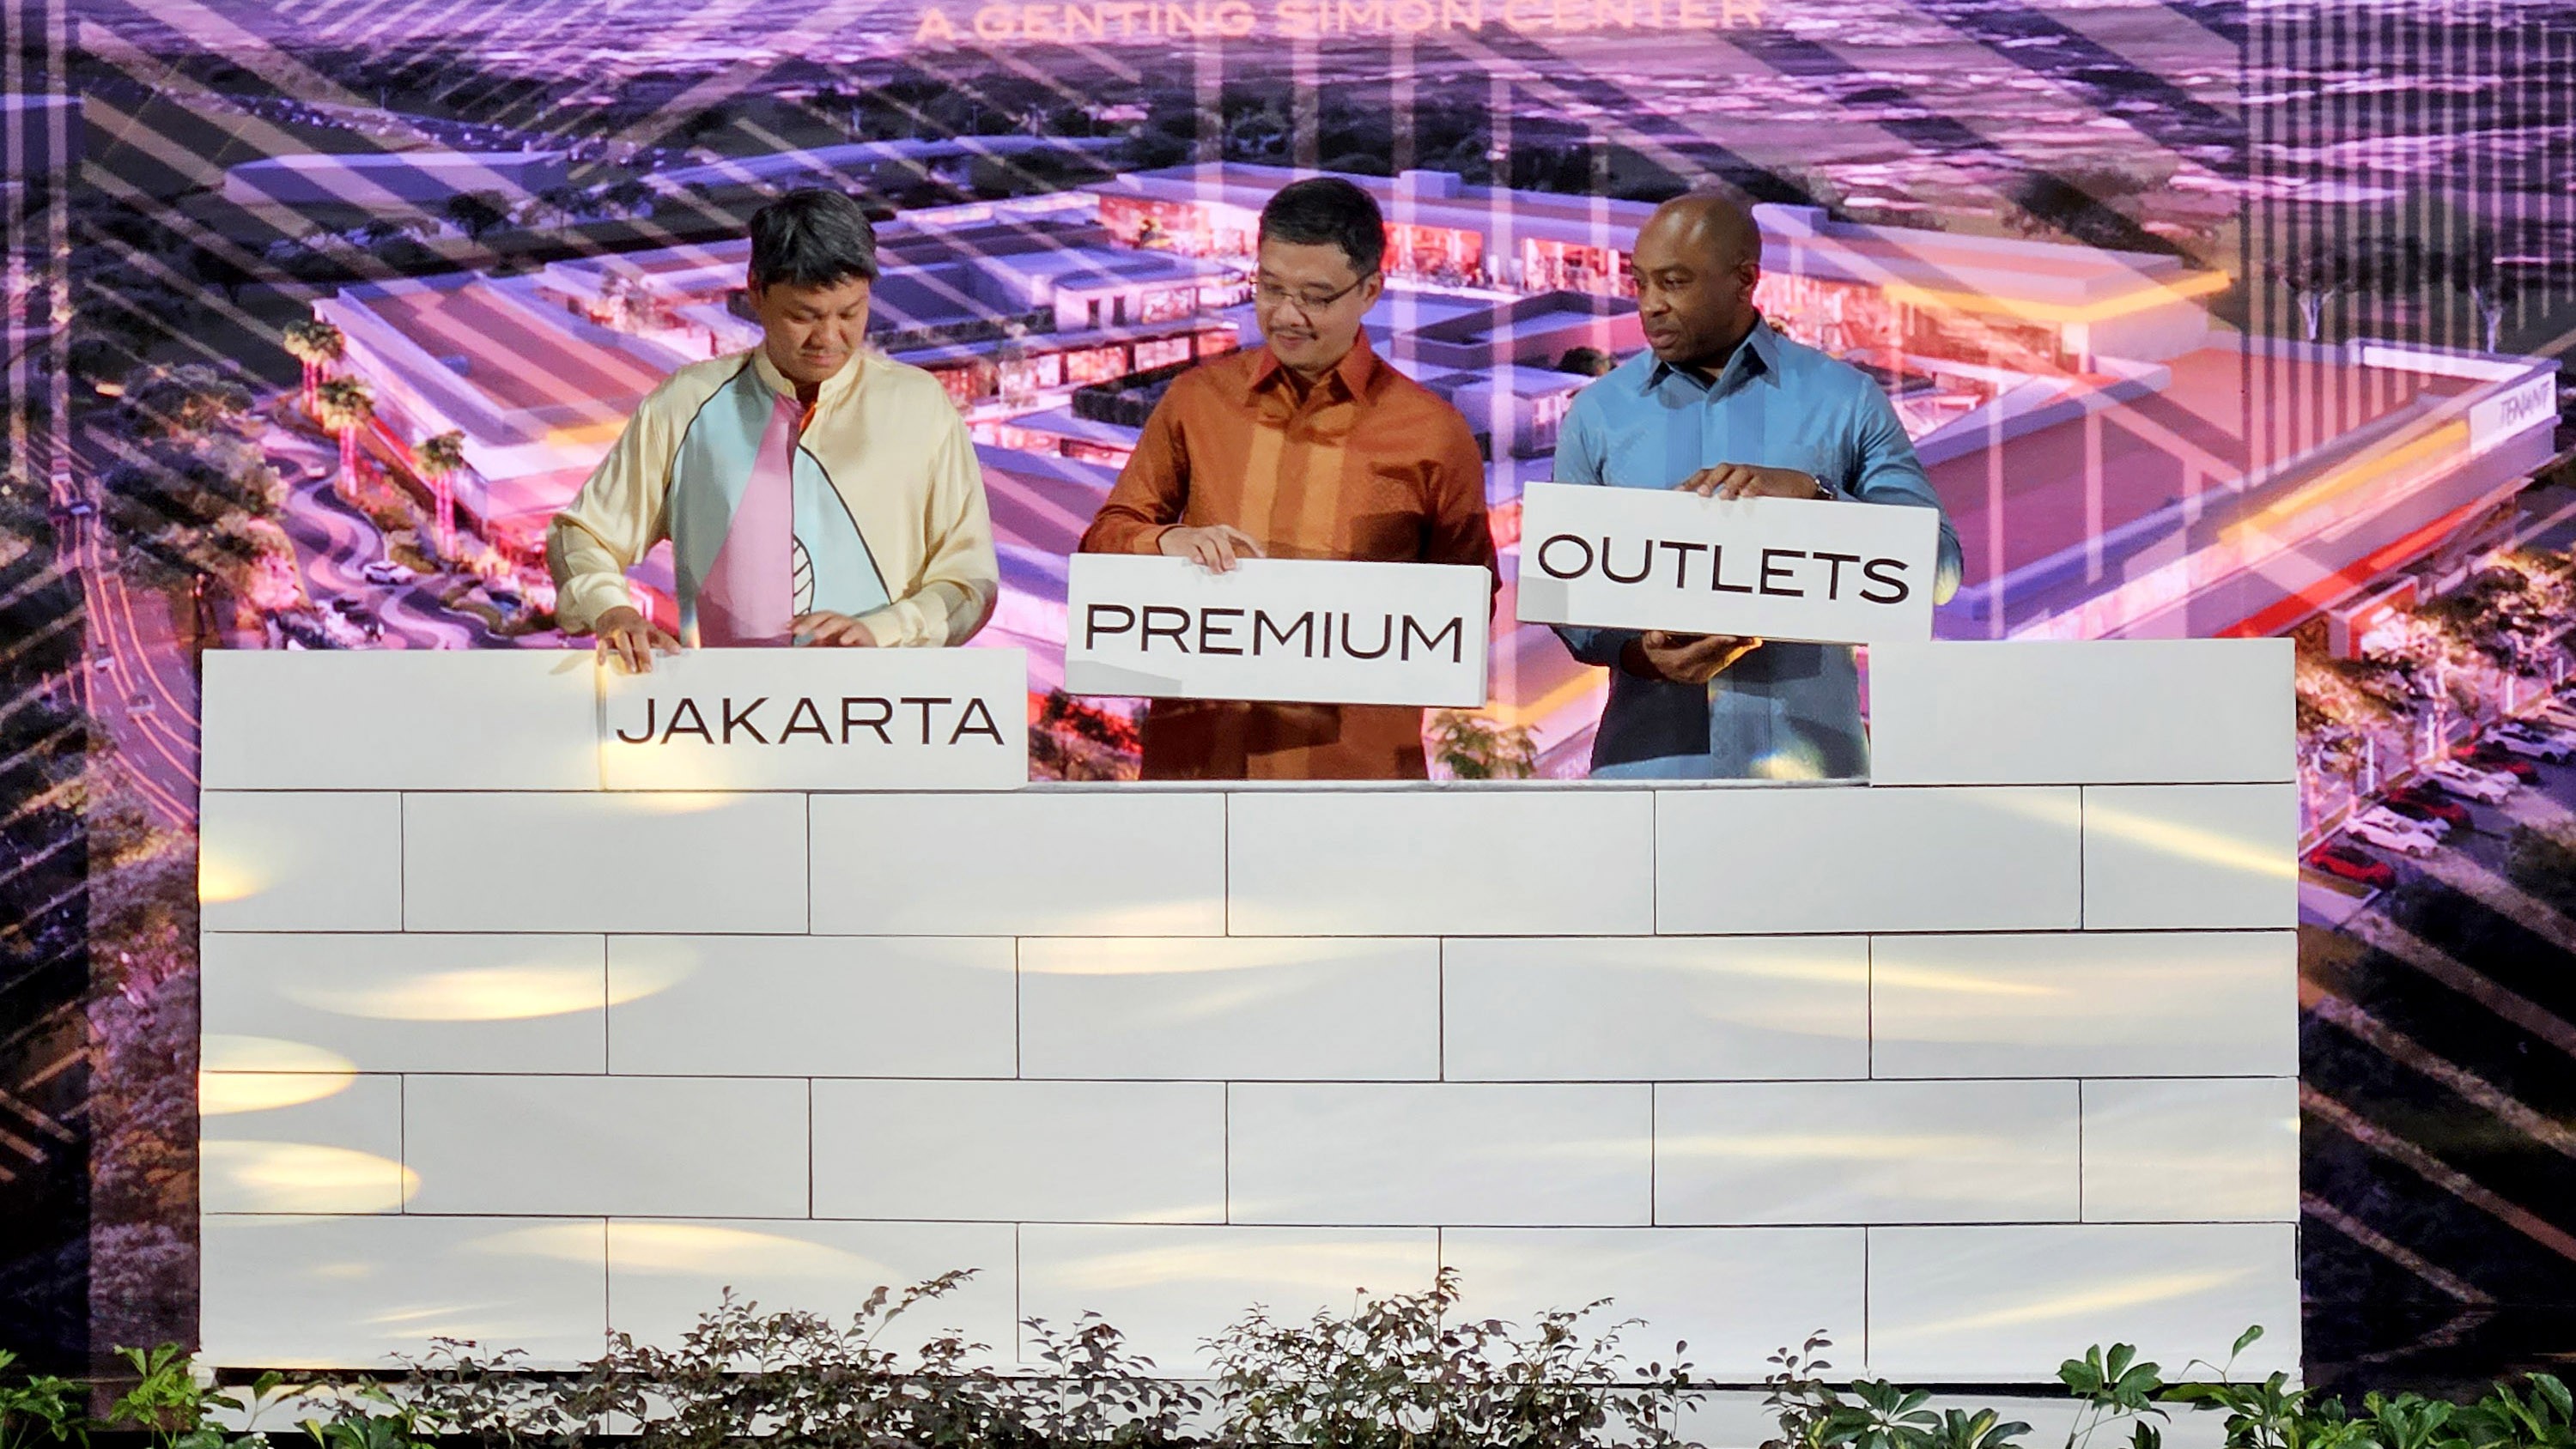 Discover Jakarta Premium Outlets